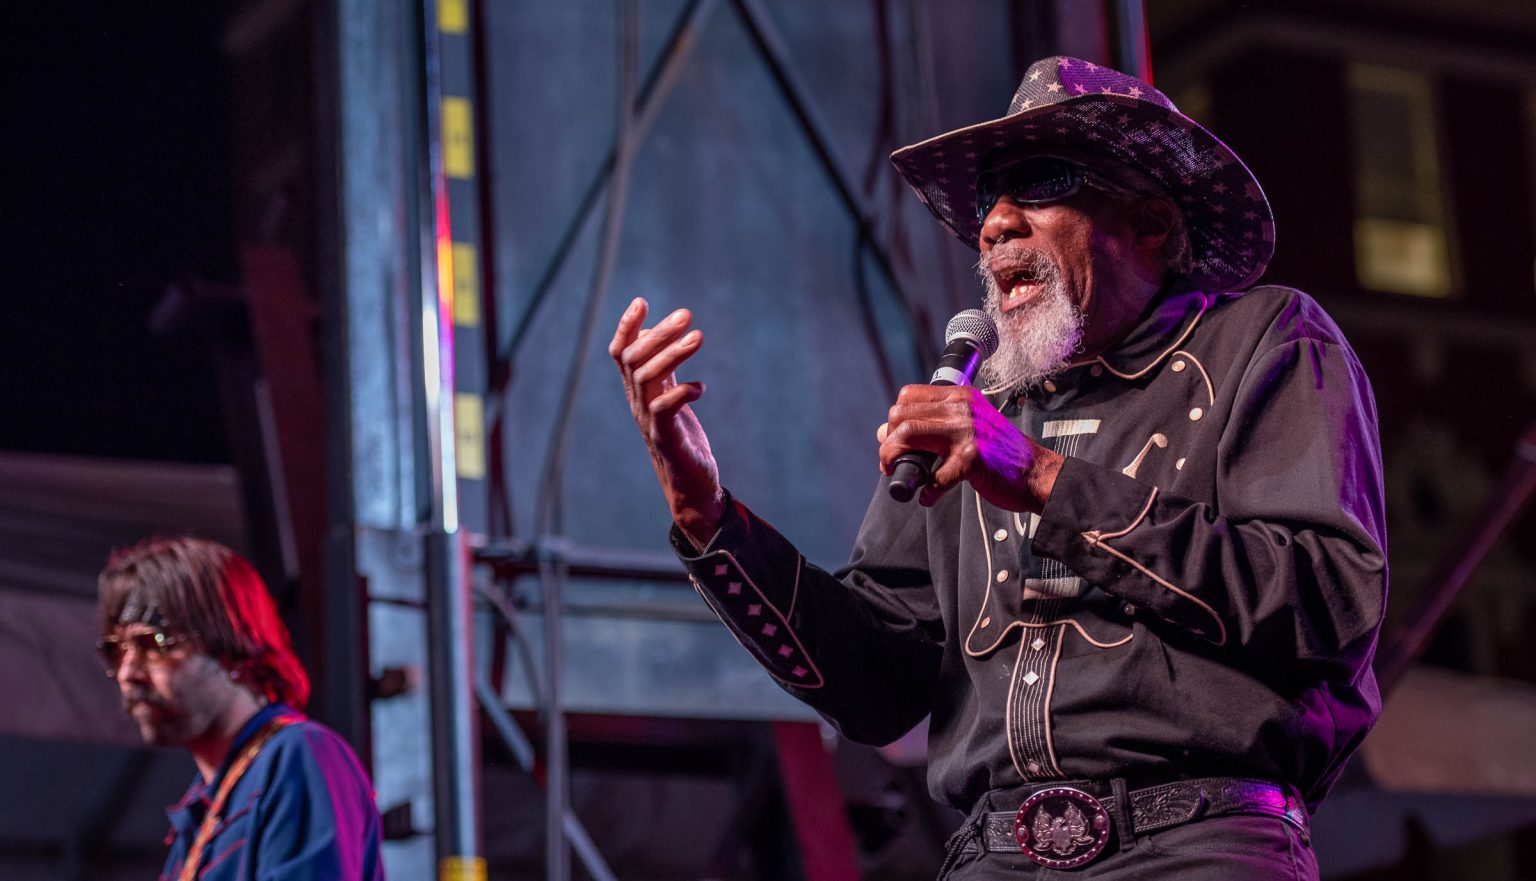 Crescent City Blues and BBQ Festival 2022, Music, New Orleans, Robert Finley